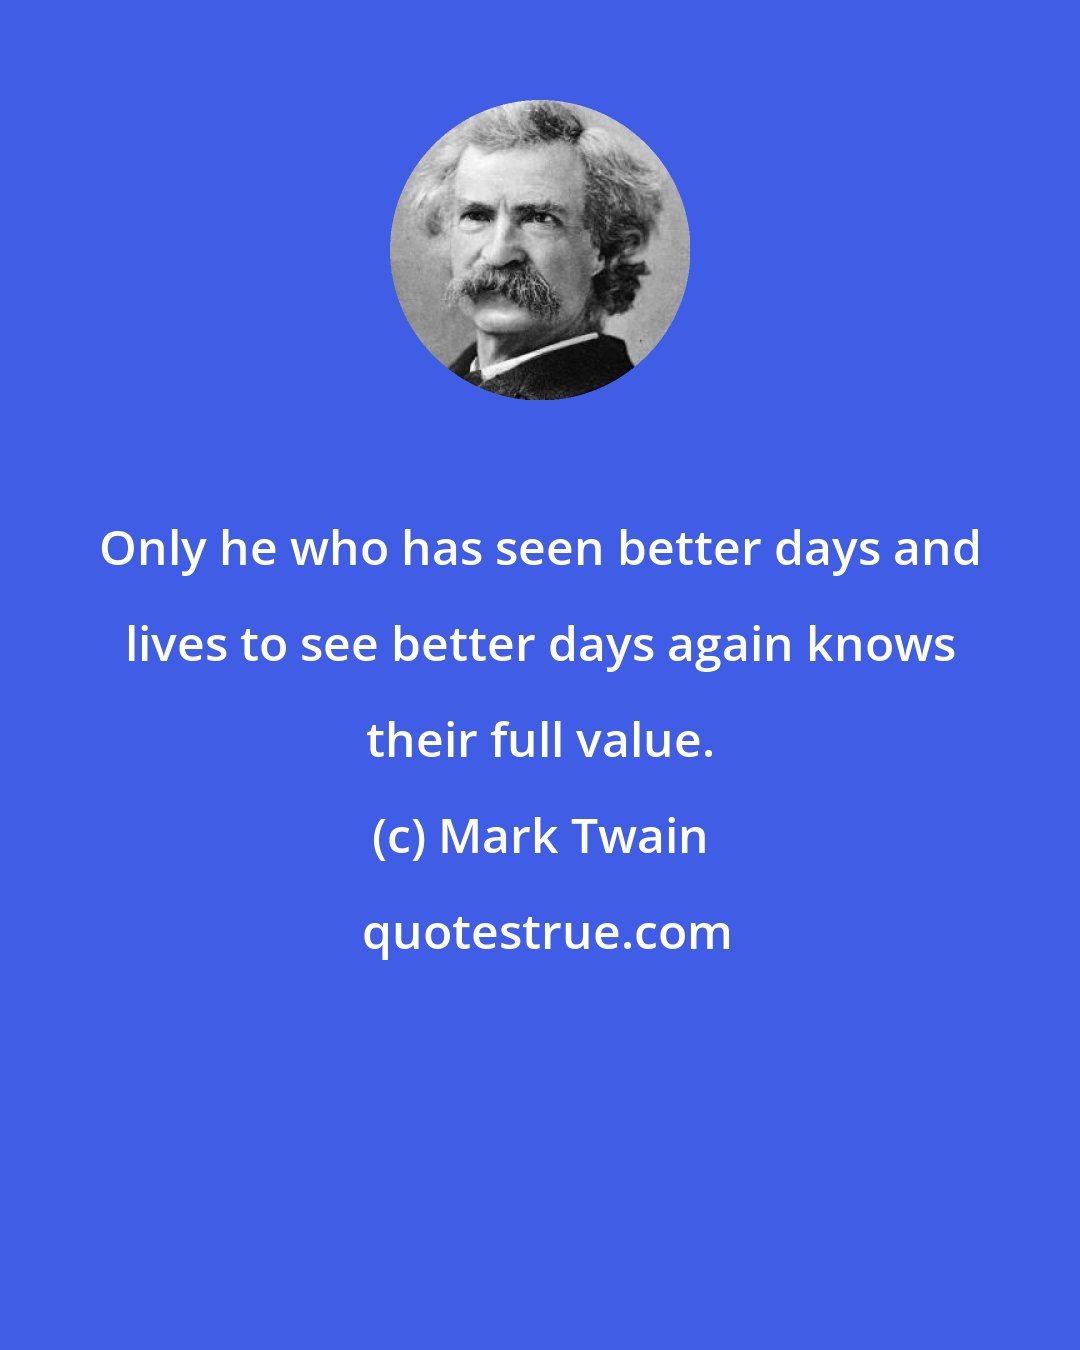 Mark Twain: Only he who has seen better days and lives to see better days again knows their full value.